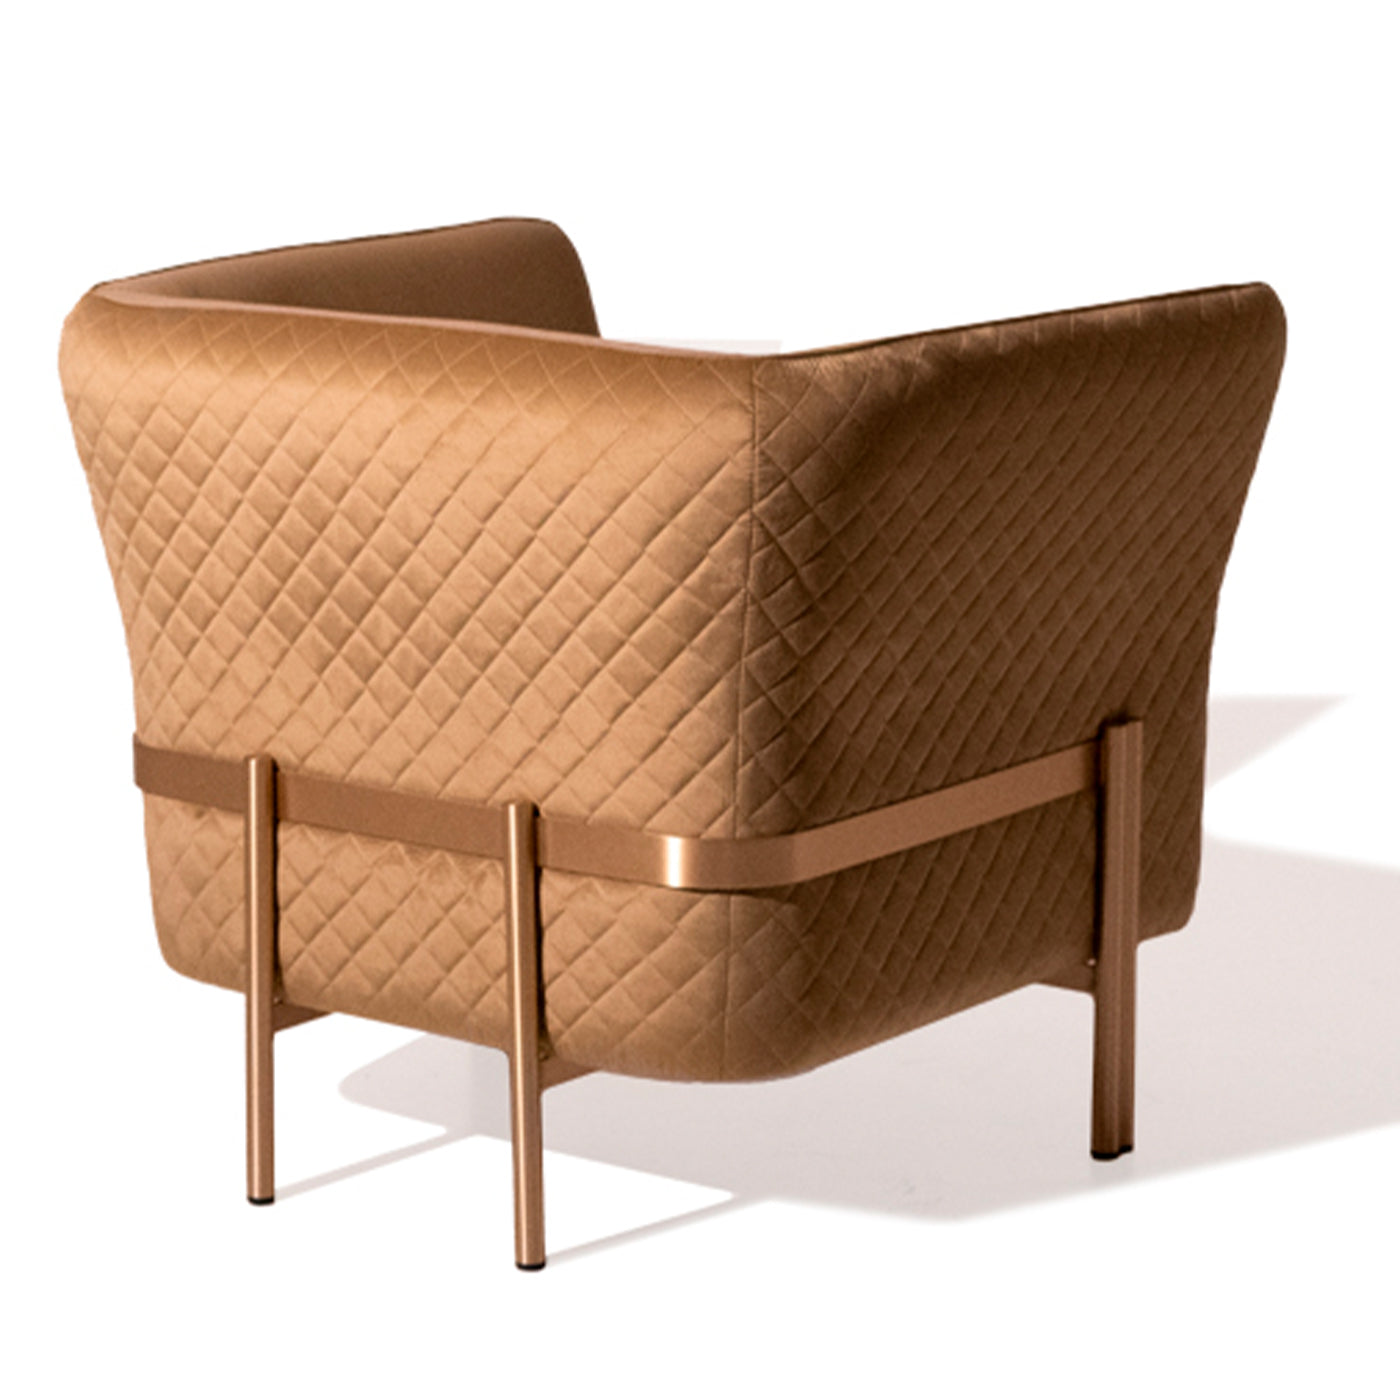 Universal Armchair by Marco and Giulio Mantellassi - Alternative view 1